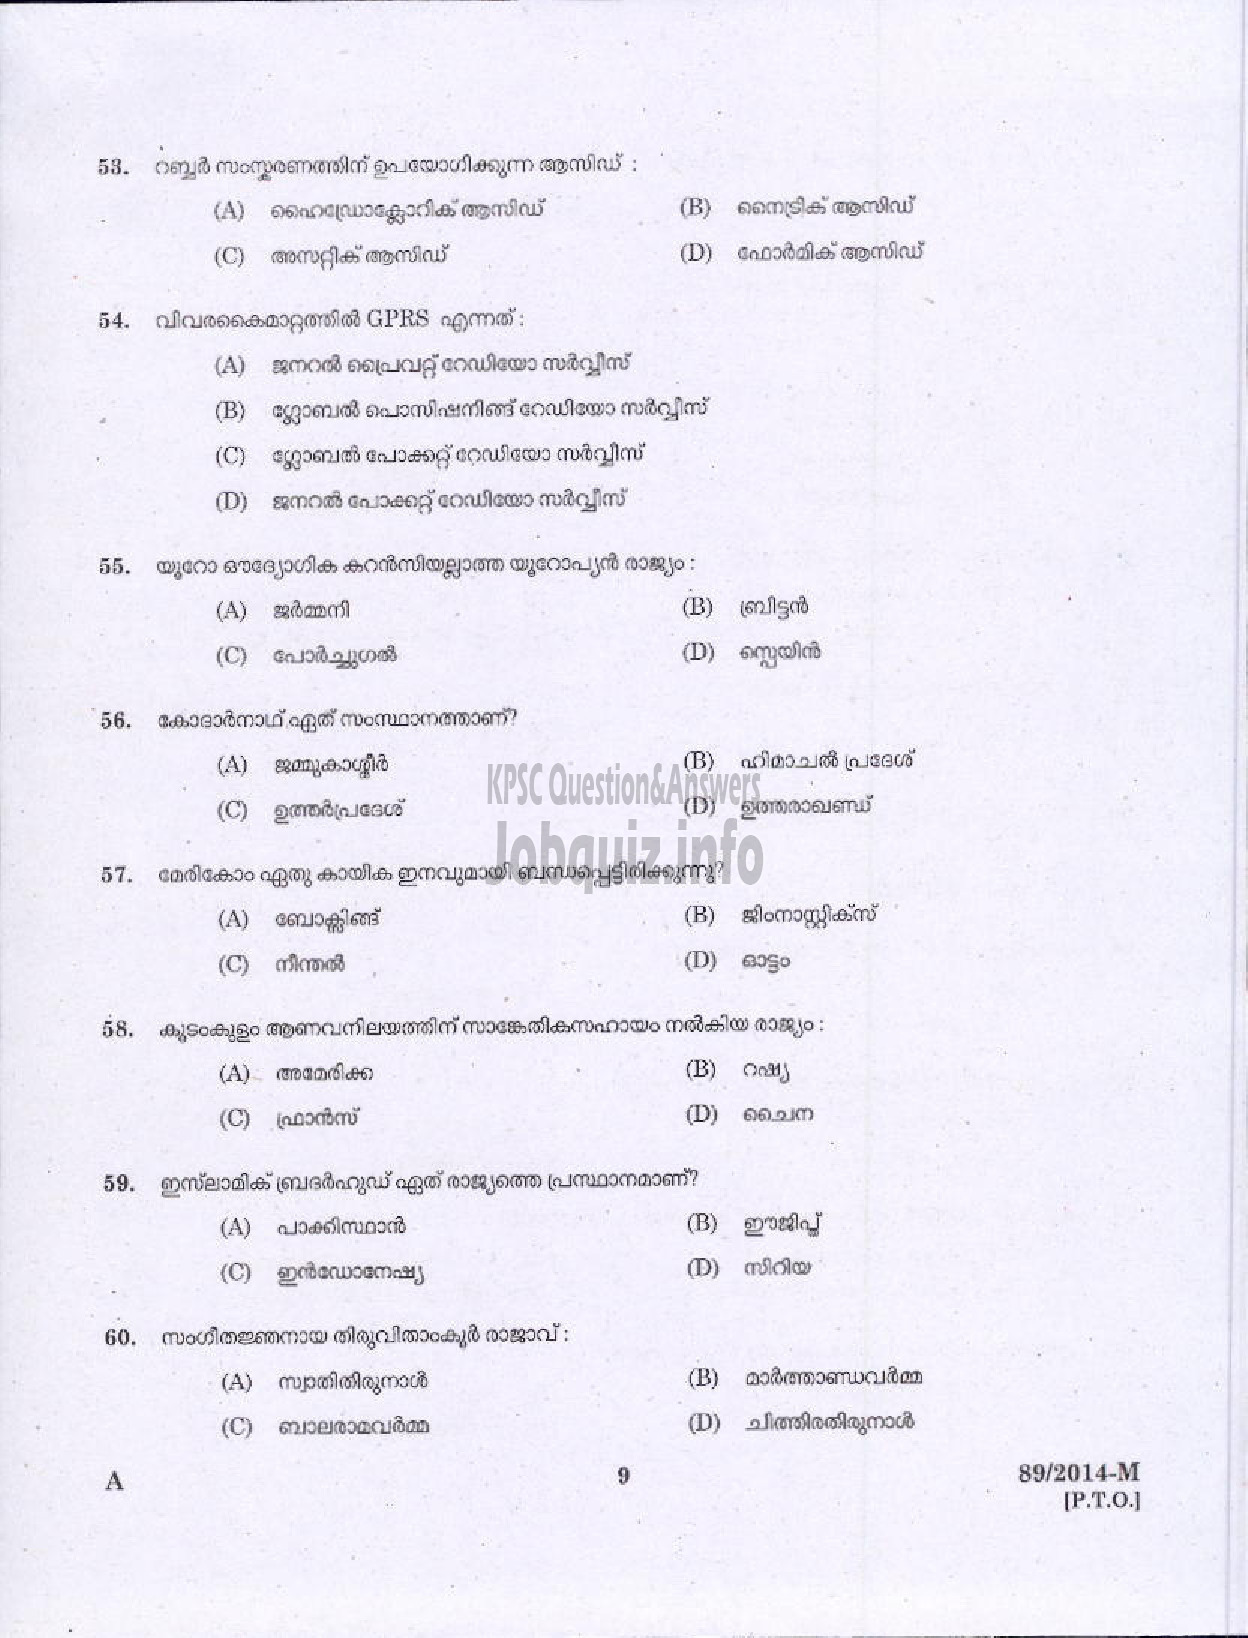 Kerala PSC Question Paper - ATTENDER SR FOR ST ONLY TCC LTD AND LGS NCA OBC VARIOUS KTYM ( Malayalam ) -7